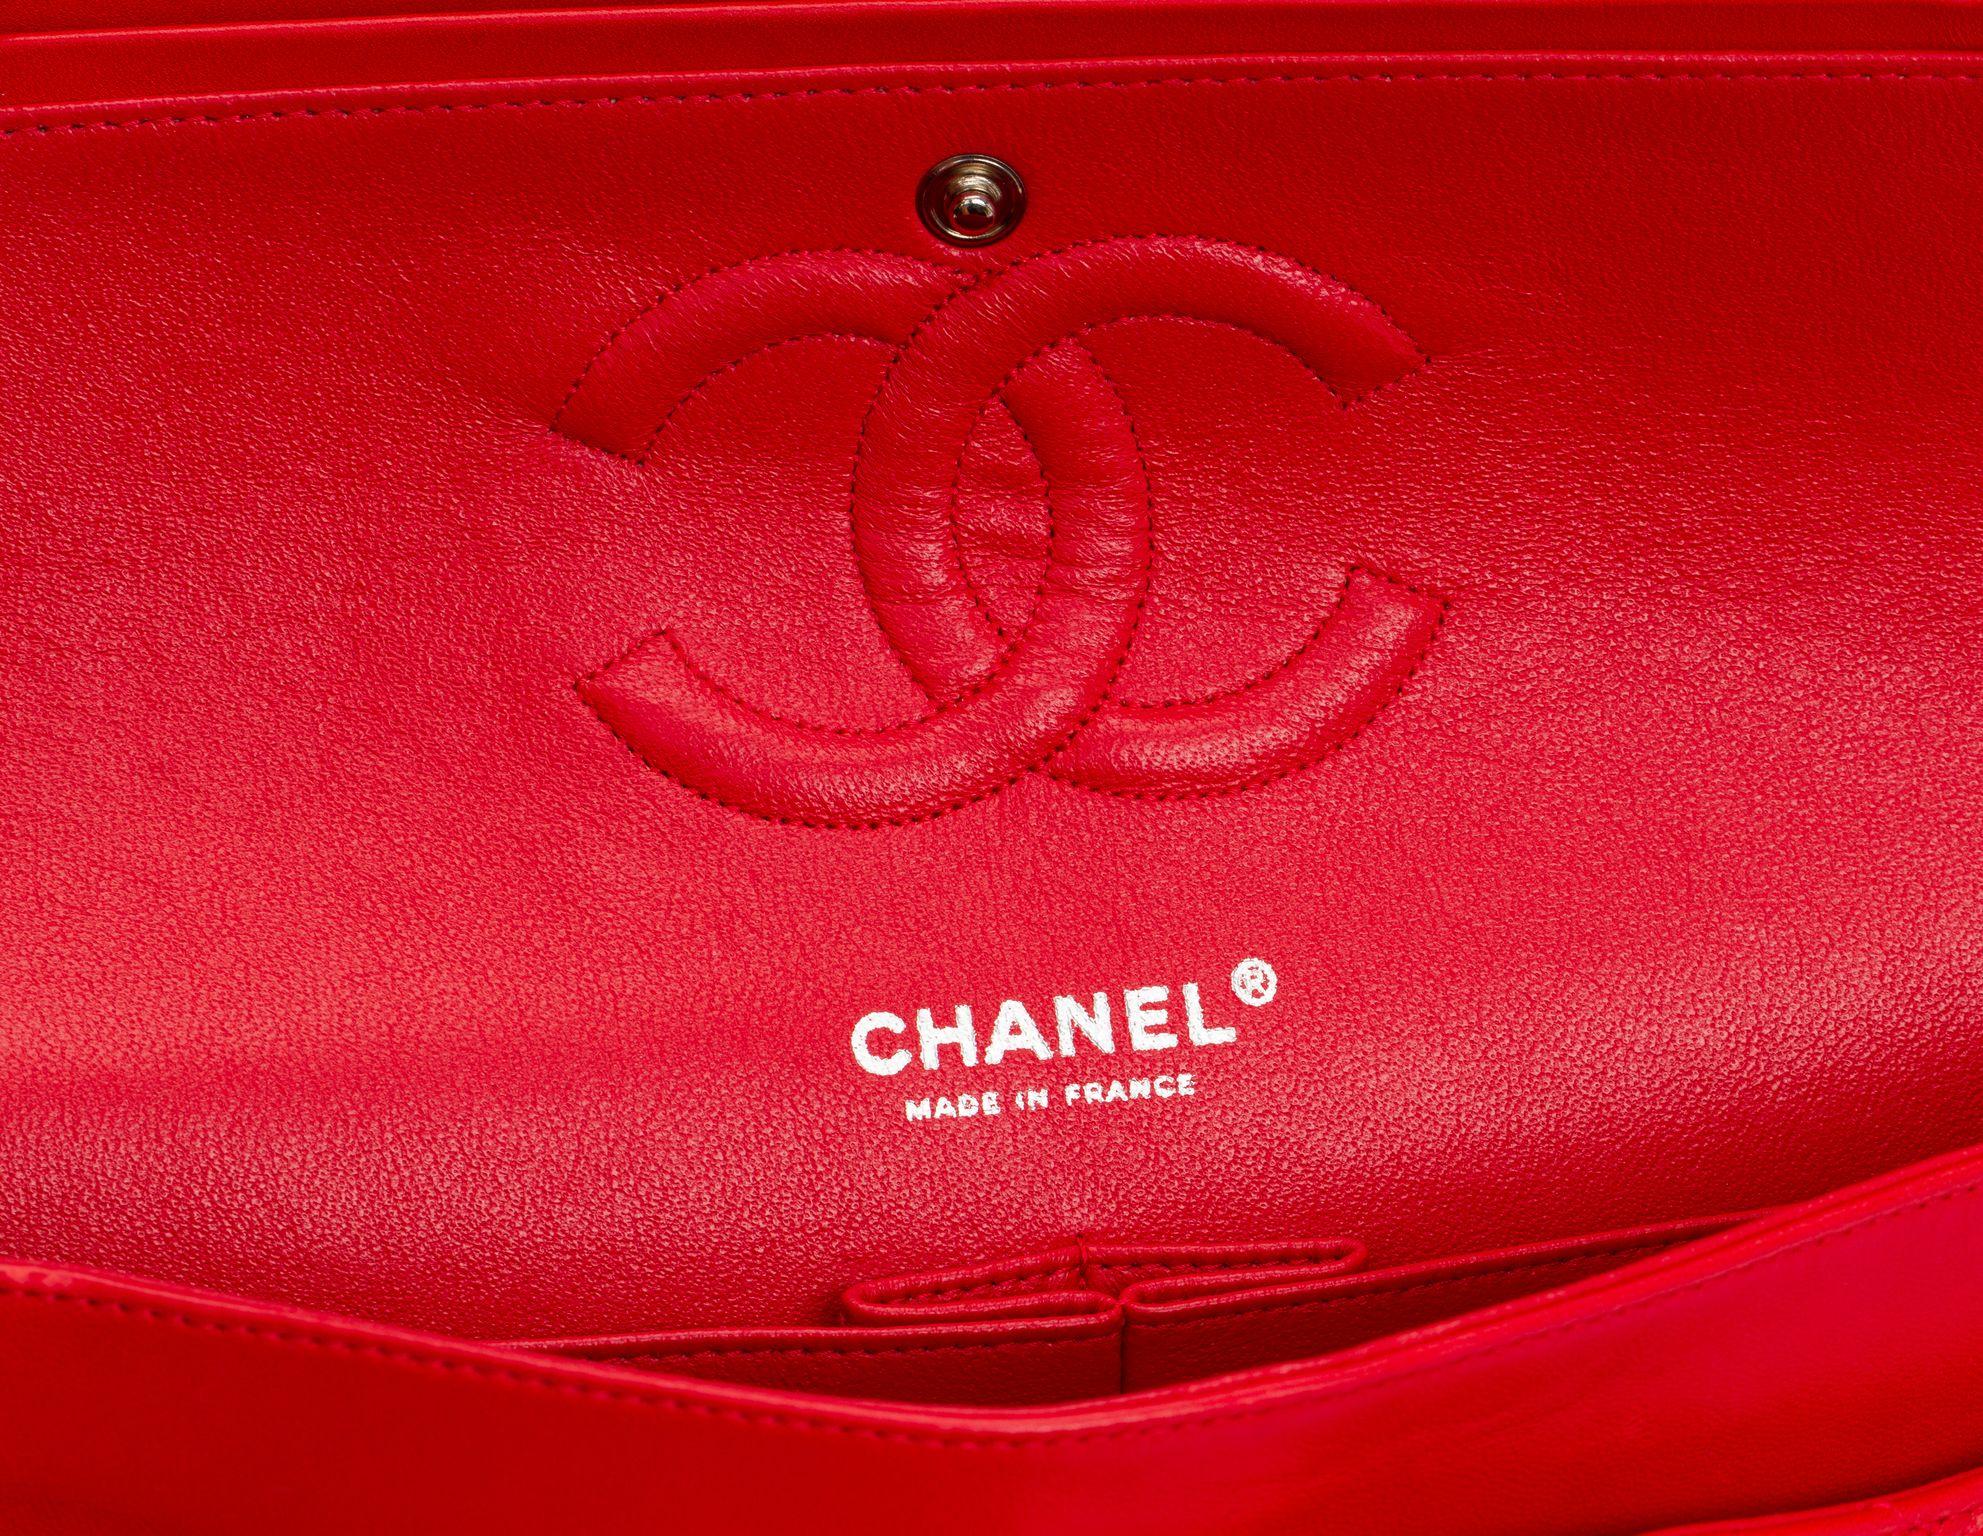 Chanel Bright Red 10 Double Flap Bag For Sale 6